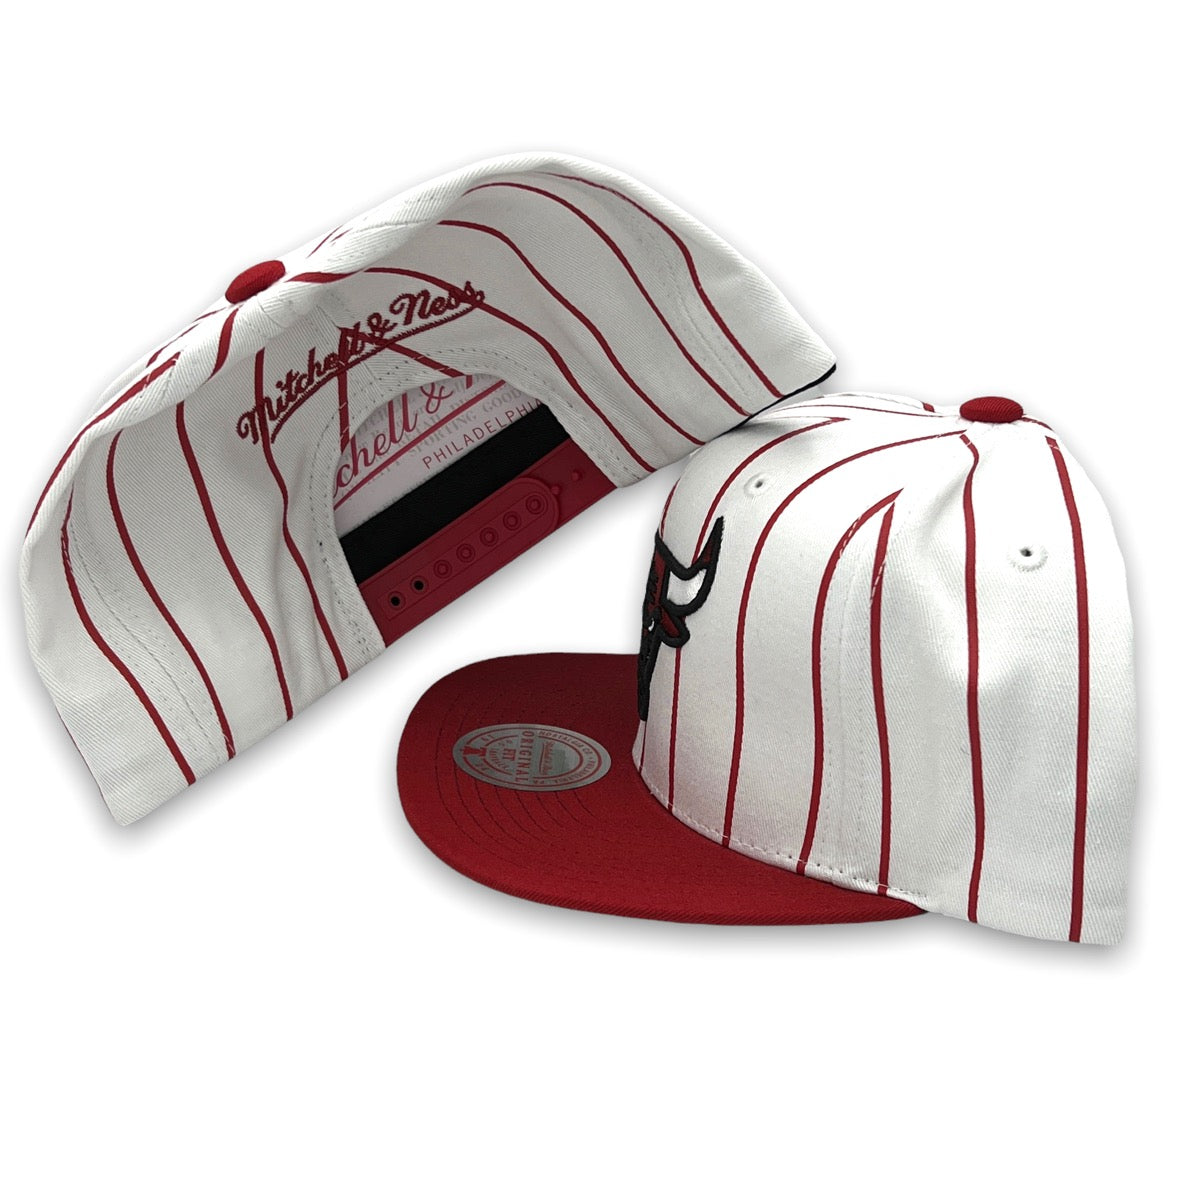 Mitchell & Ness Chicago Bulls Snapback Hat Adjustable Cap -  Black/Red/White/Side Patches